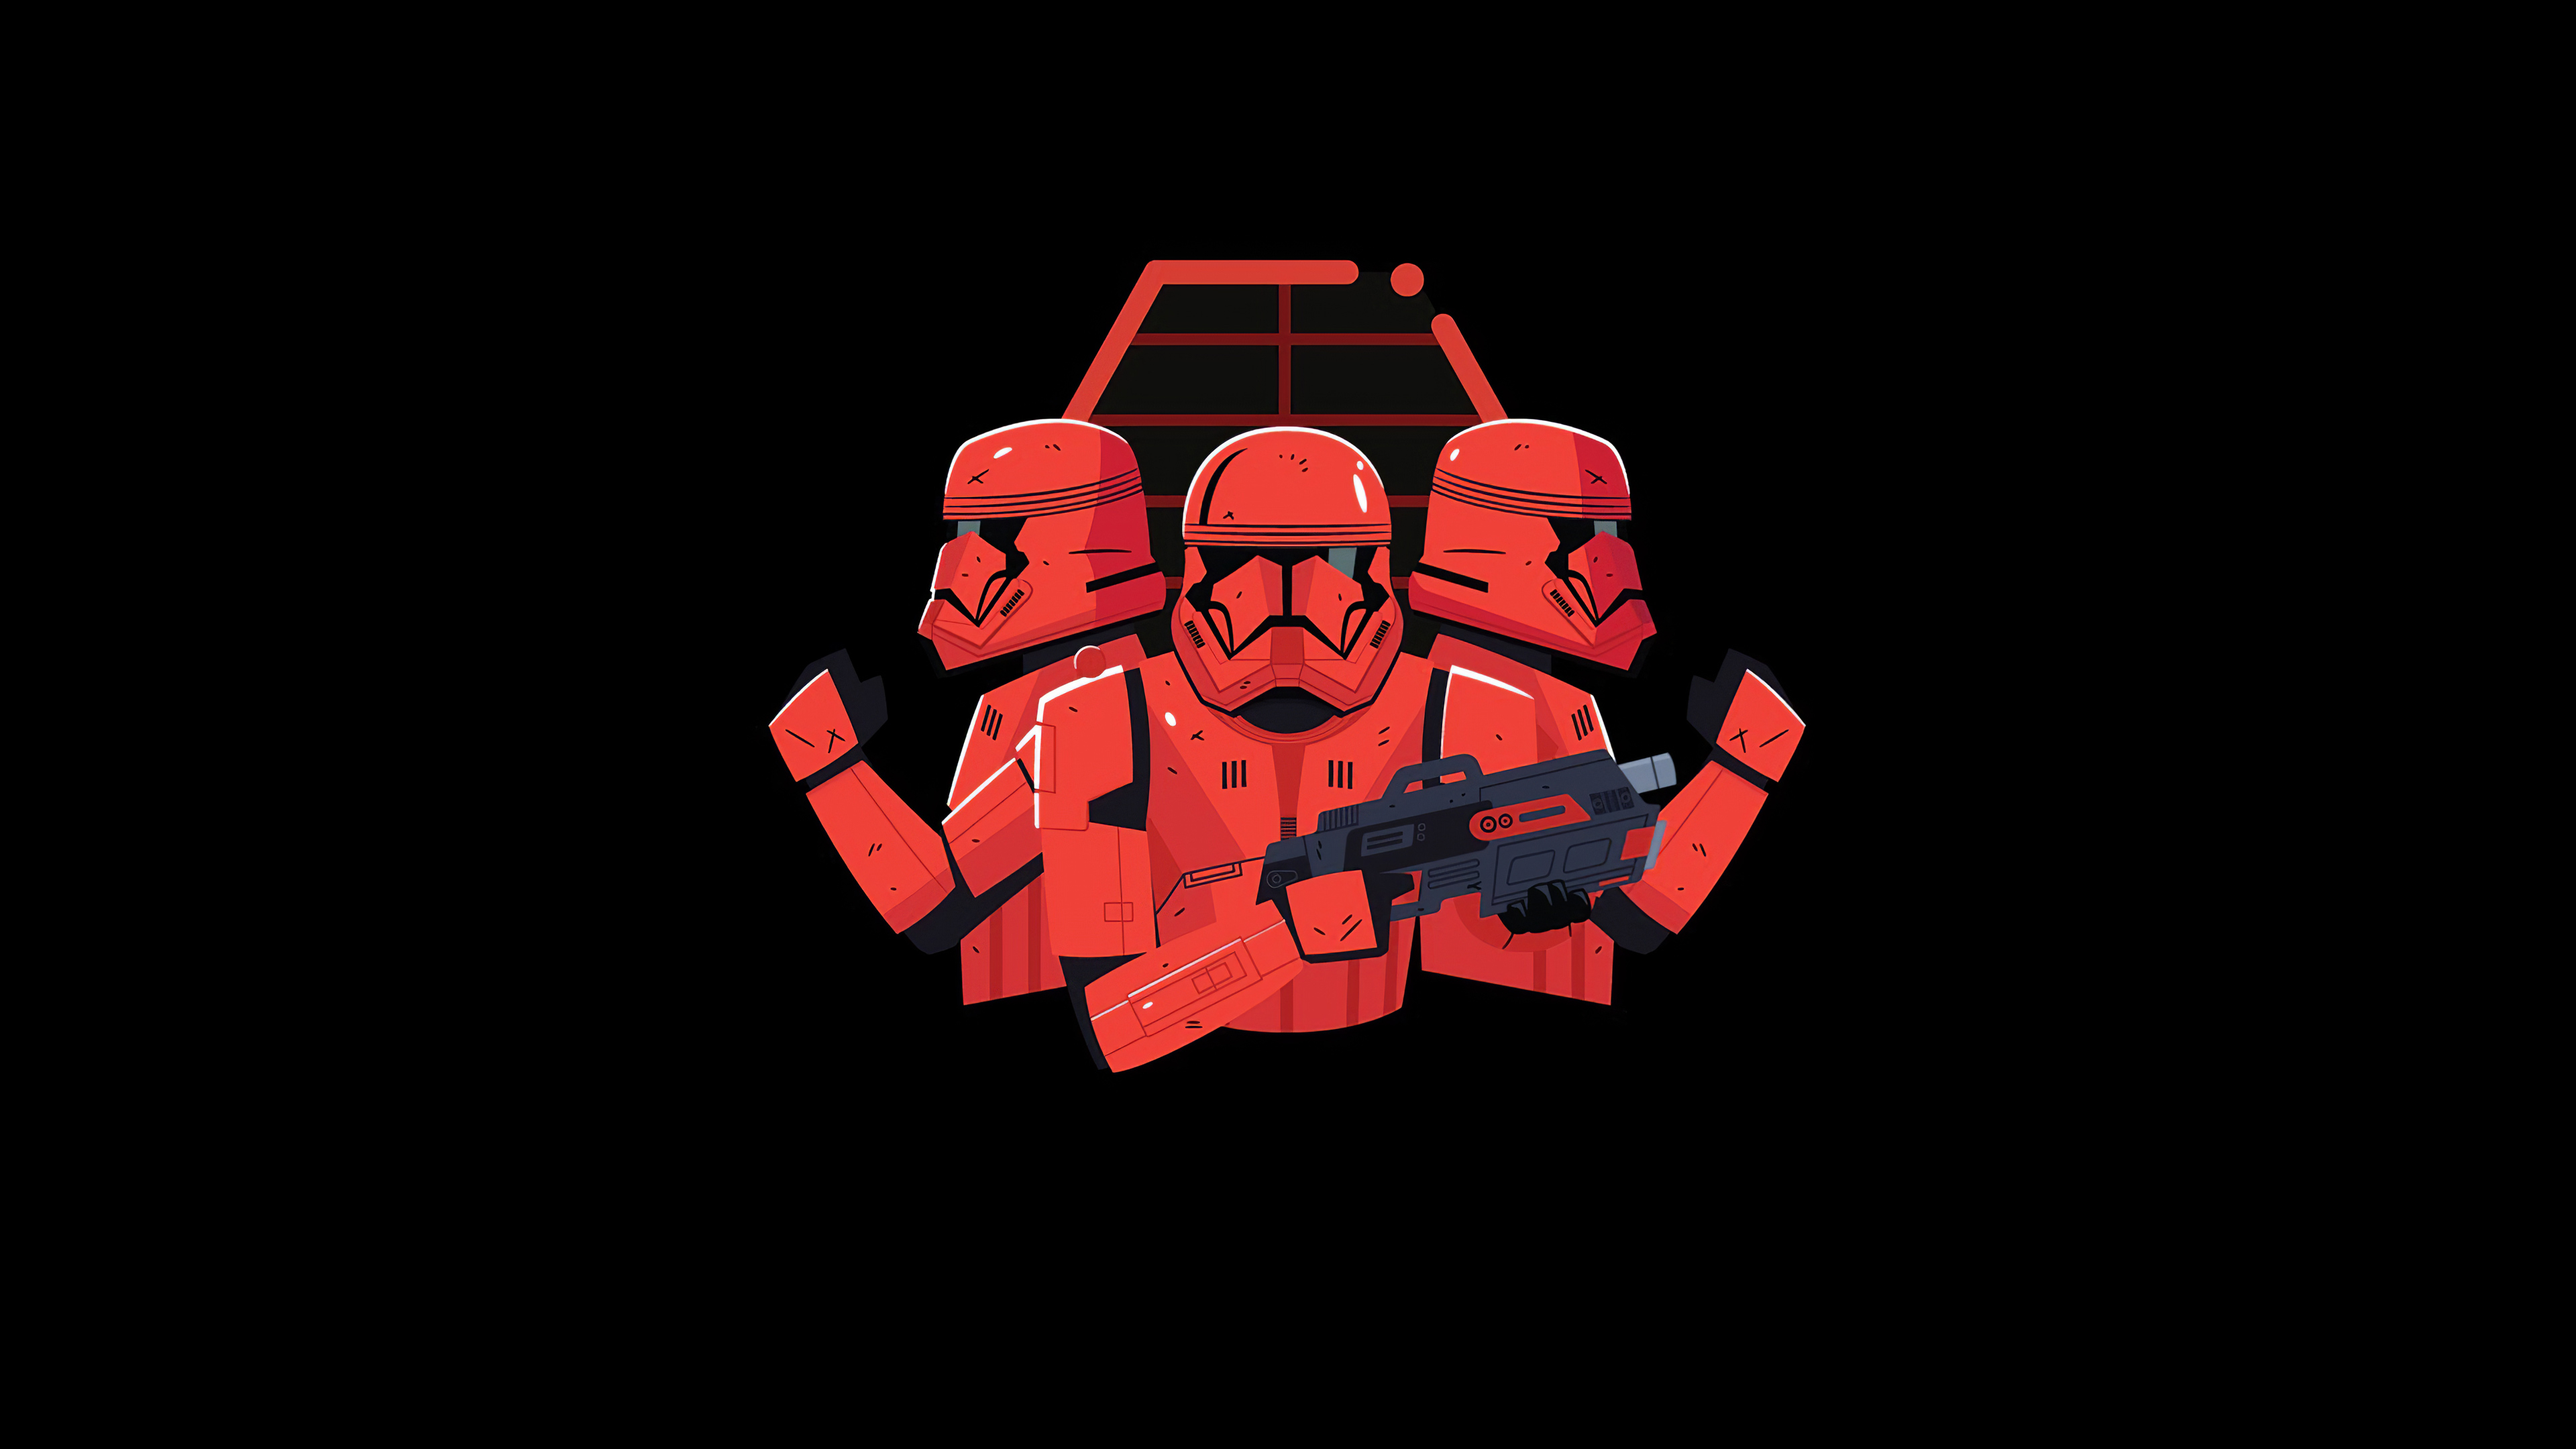 3840x2160 1080x1920 Star Wars Stormtrooper Minimal Art Iphone 7,6s,6 Plus, Pixel xl ,One Plus 3,3t,5 HD 4k Wallpapers, Images, Backgrounds, Photos and Pictures